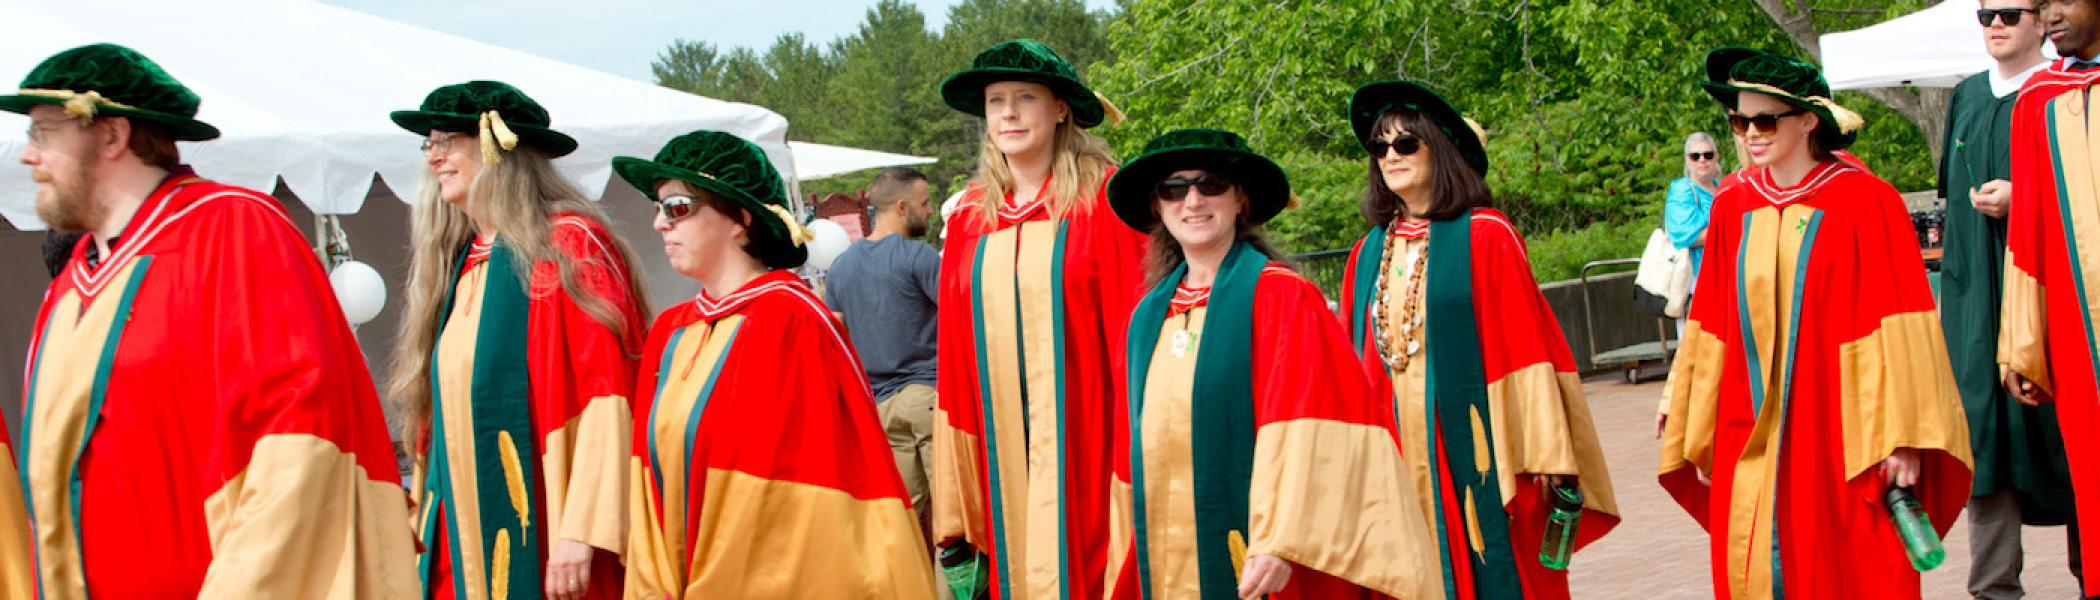 A group of graduate students walking in a line on convocation